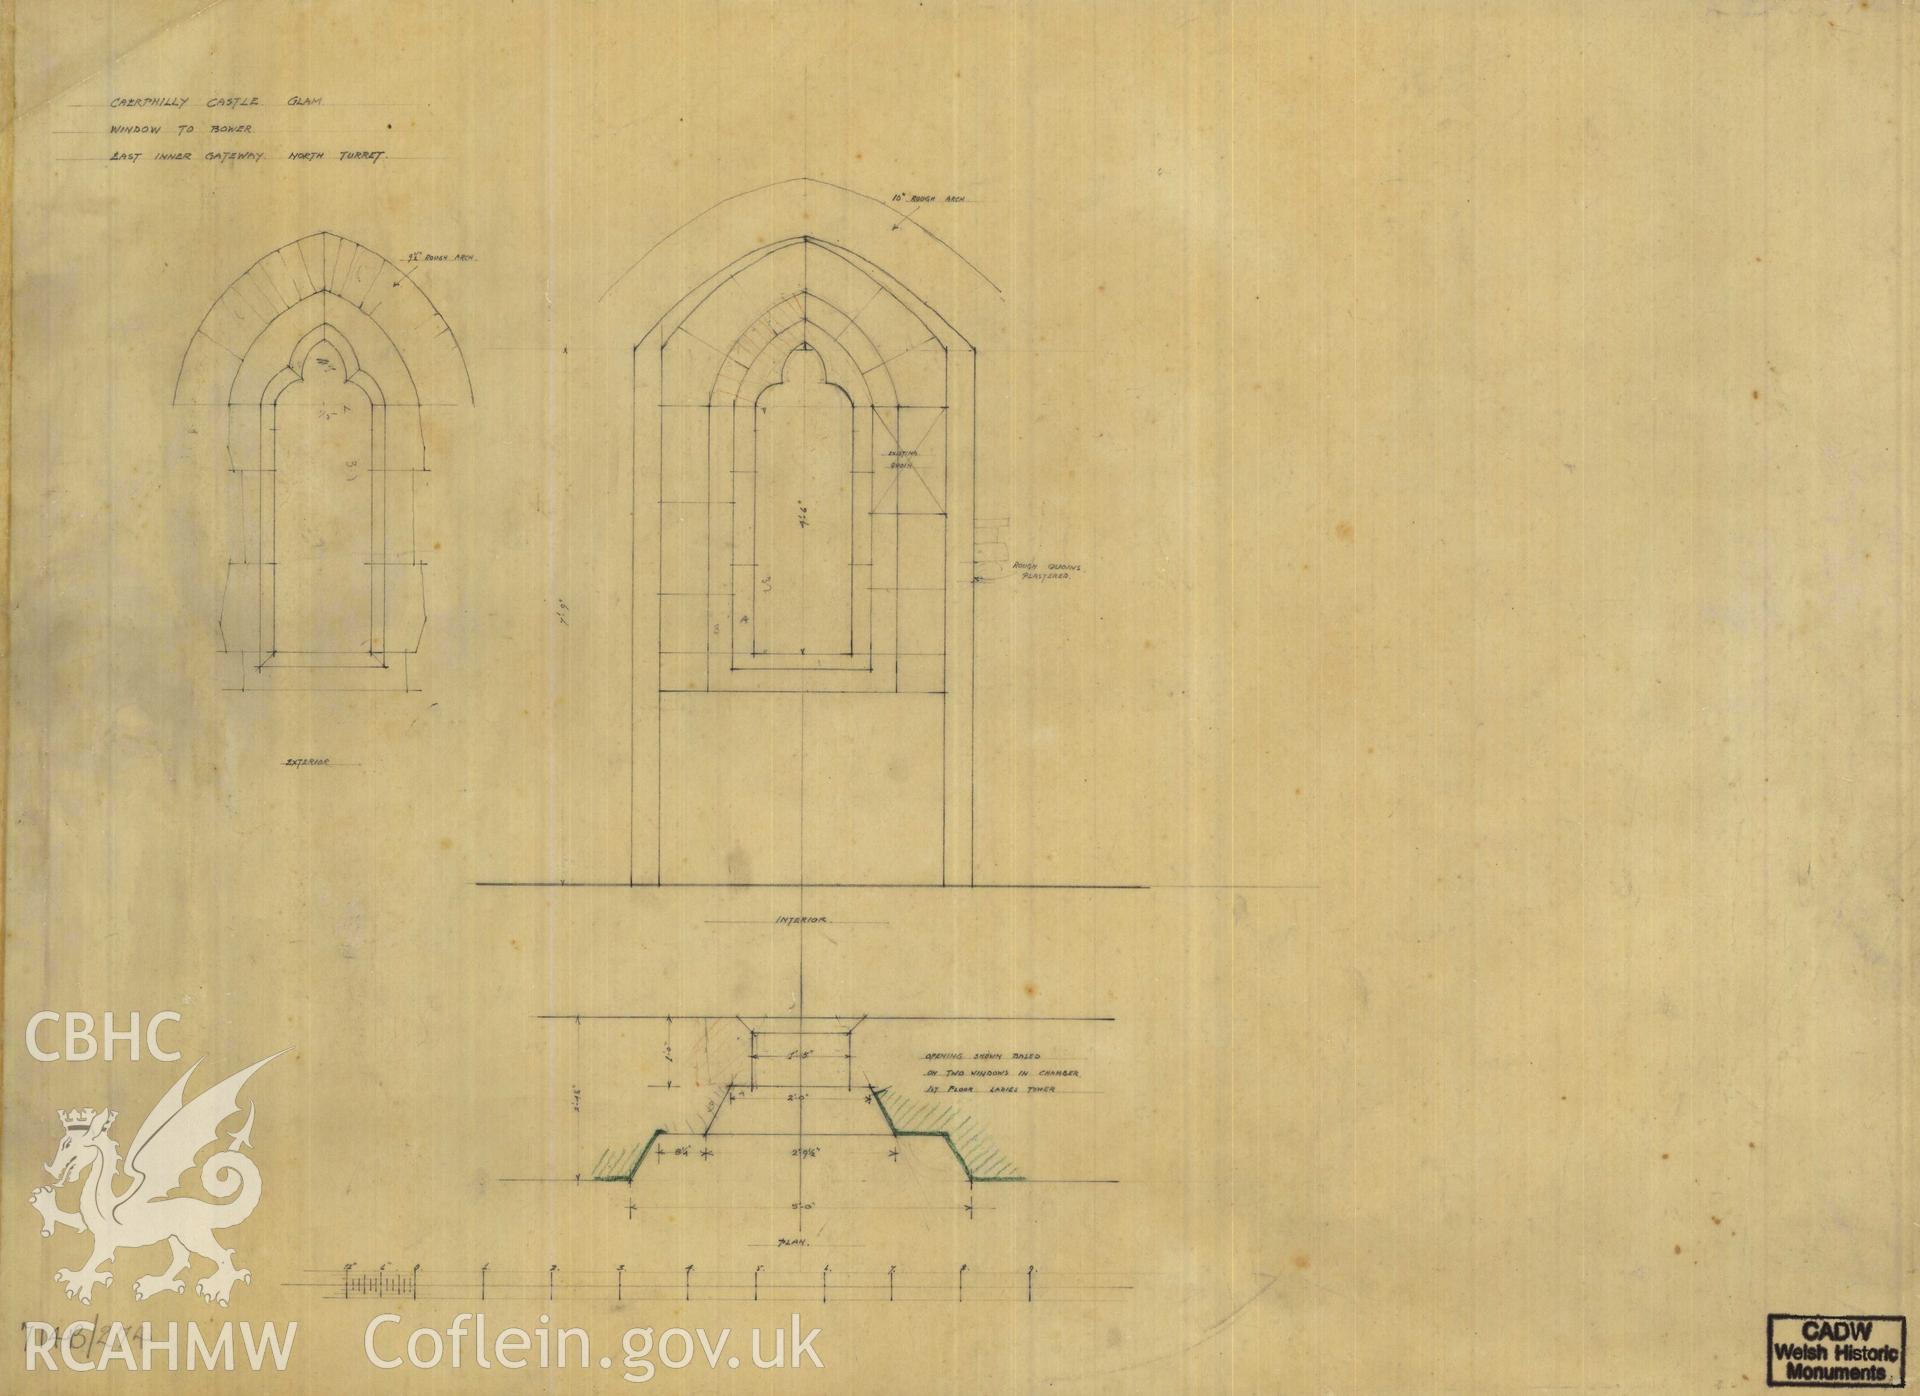 Cadw guardianship monument drawing of Caerphilly Castle. Inner E gate, N turret "Bower" window. Cadw Ref. No:714B/274. Scale 1:24.